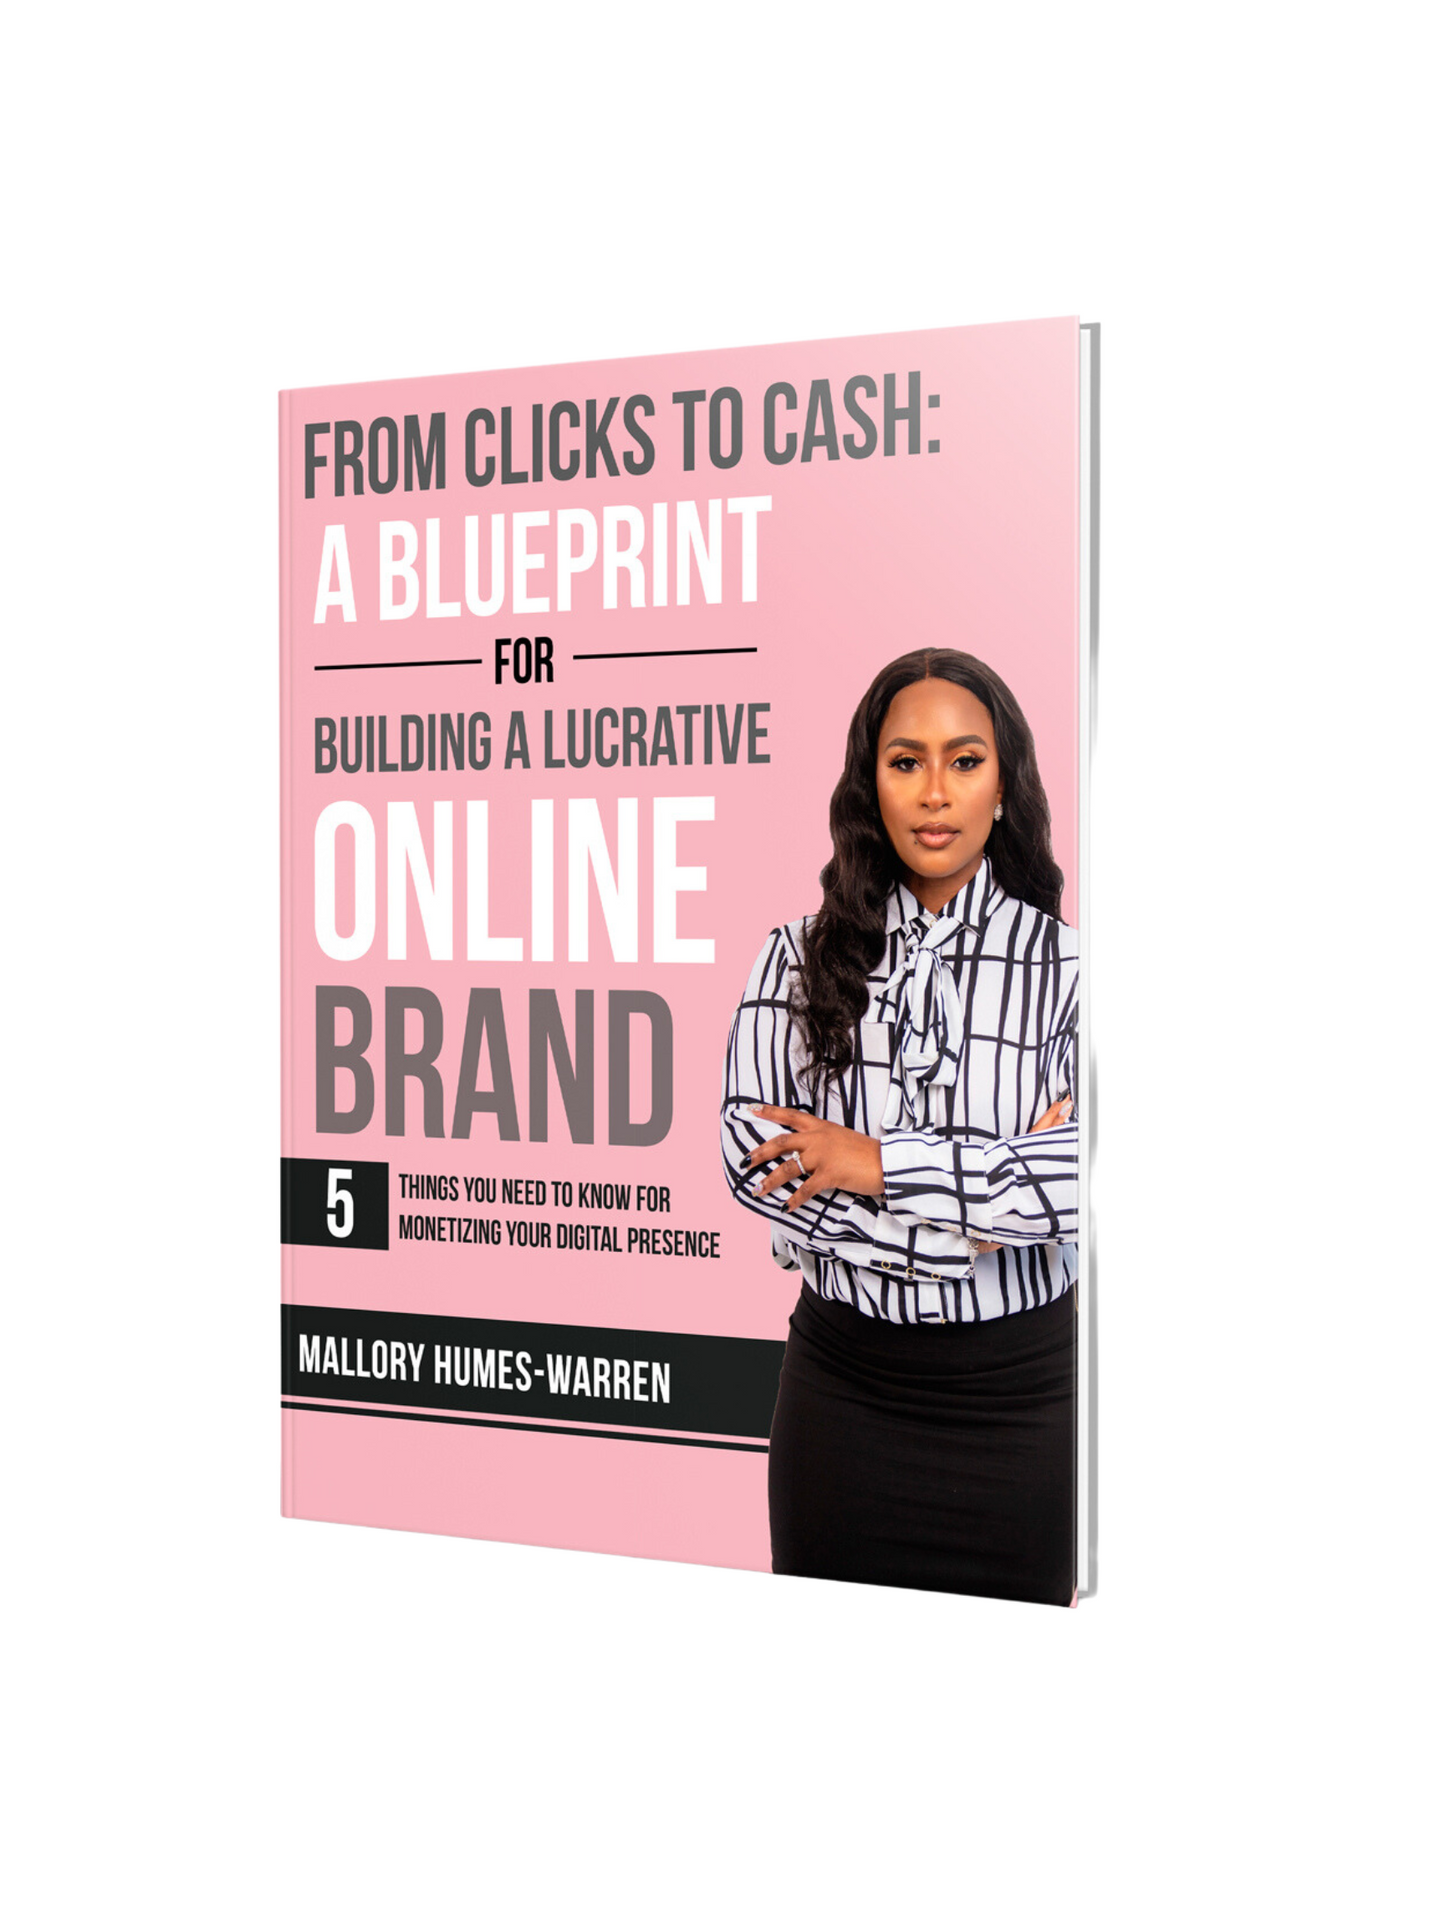 From Clicks to Cash: How to build a lucrative online brand.